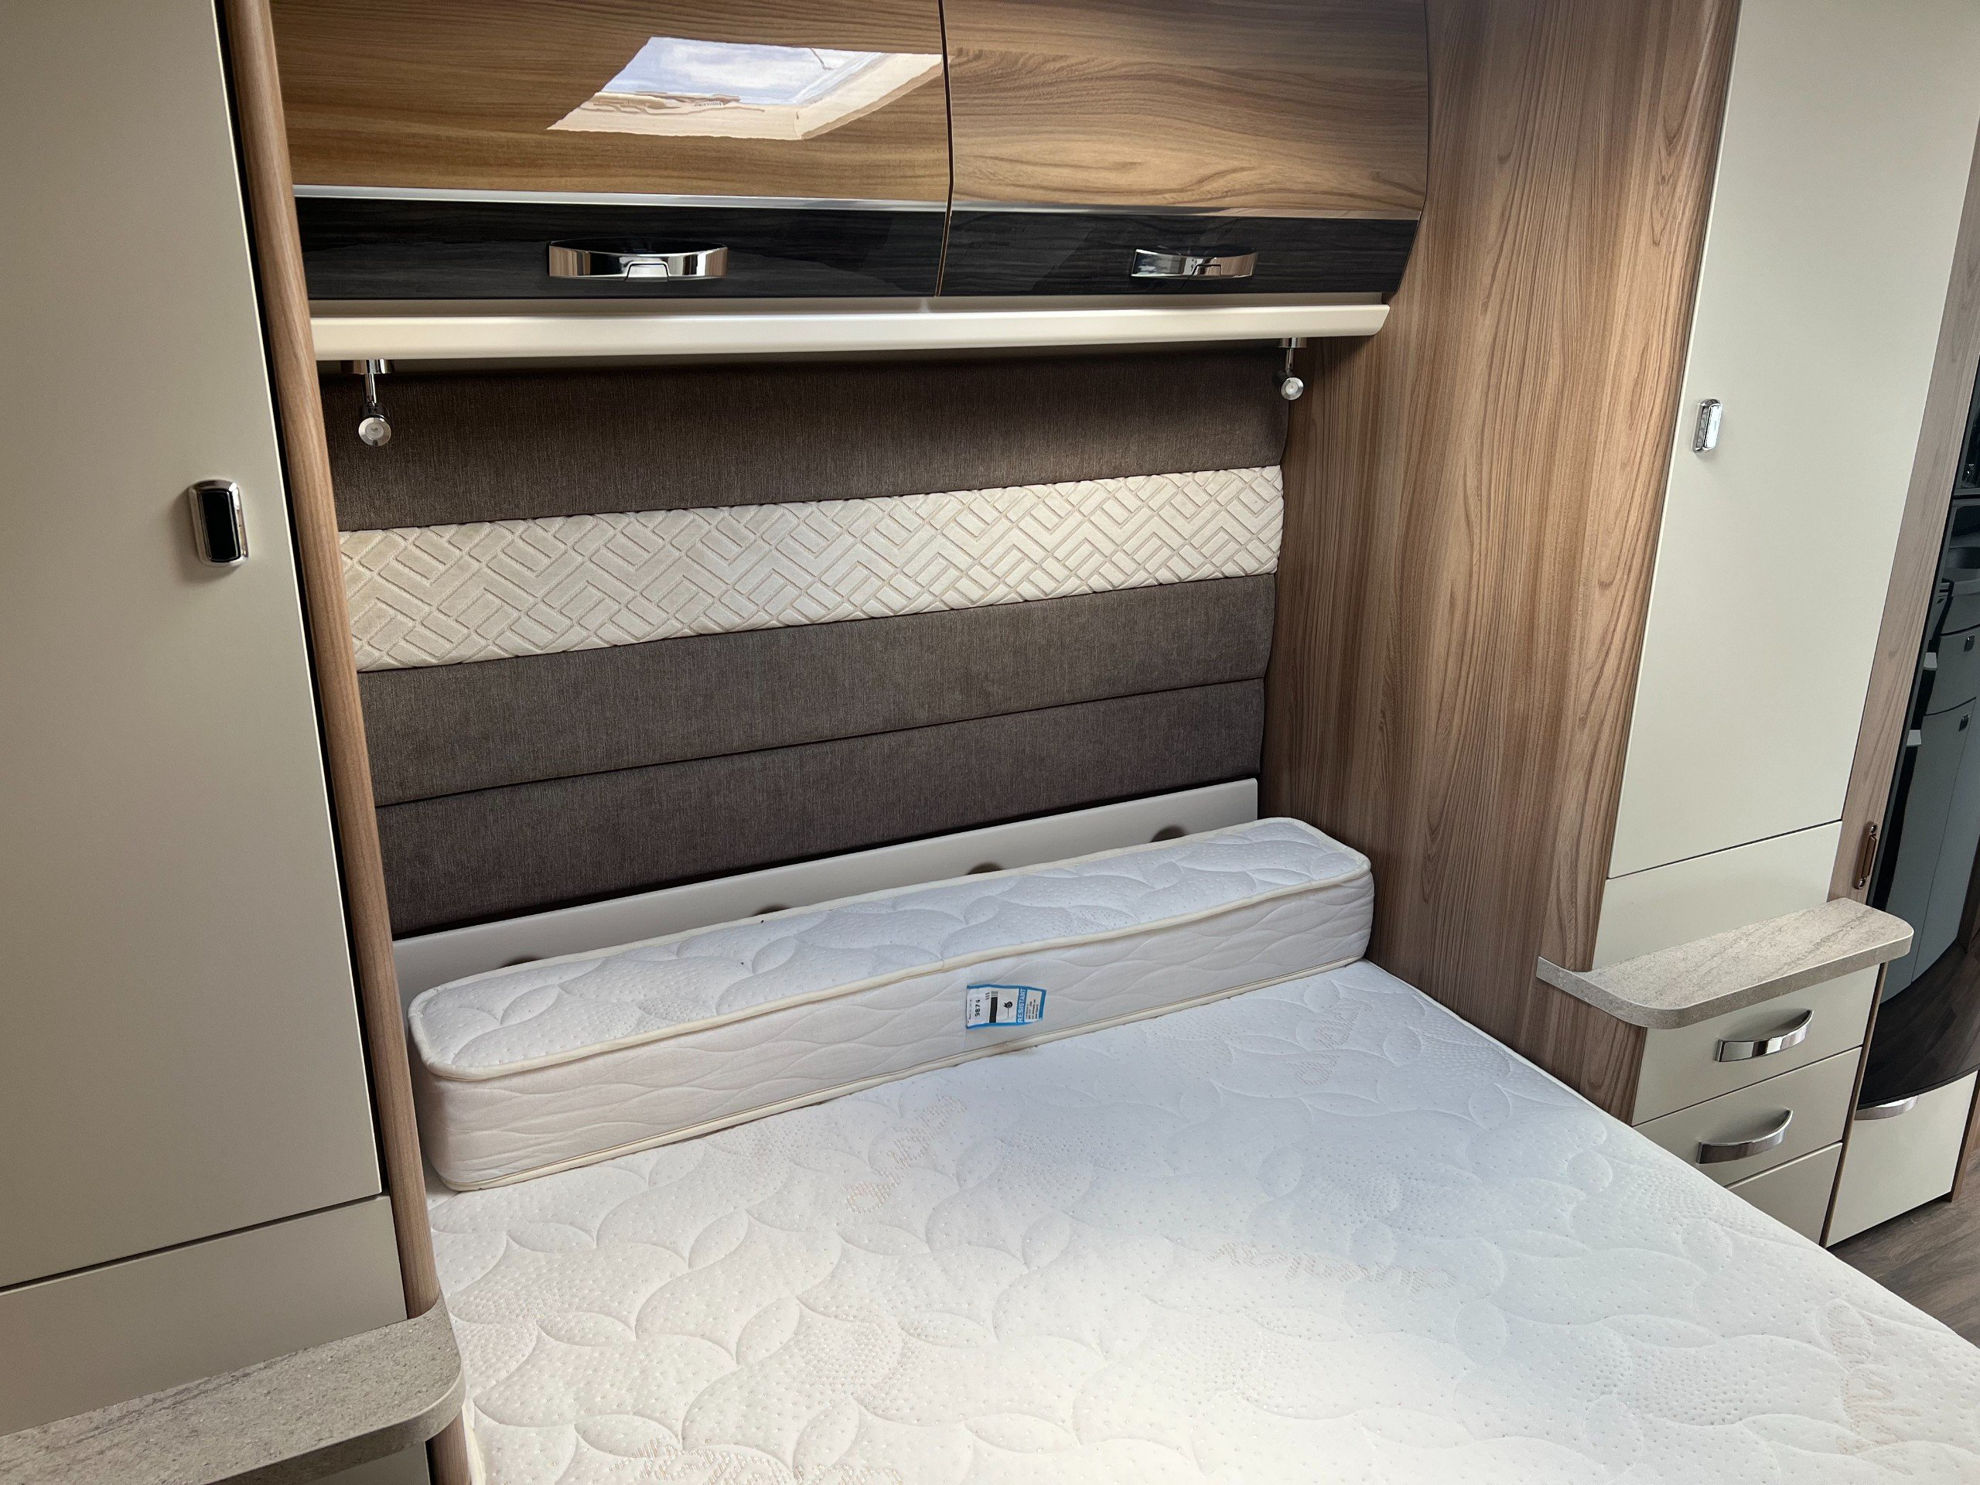 Picture of 2019 Swift Elegance 645